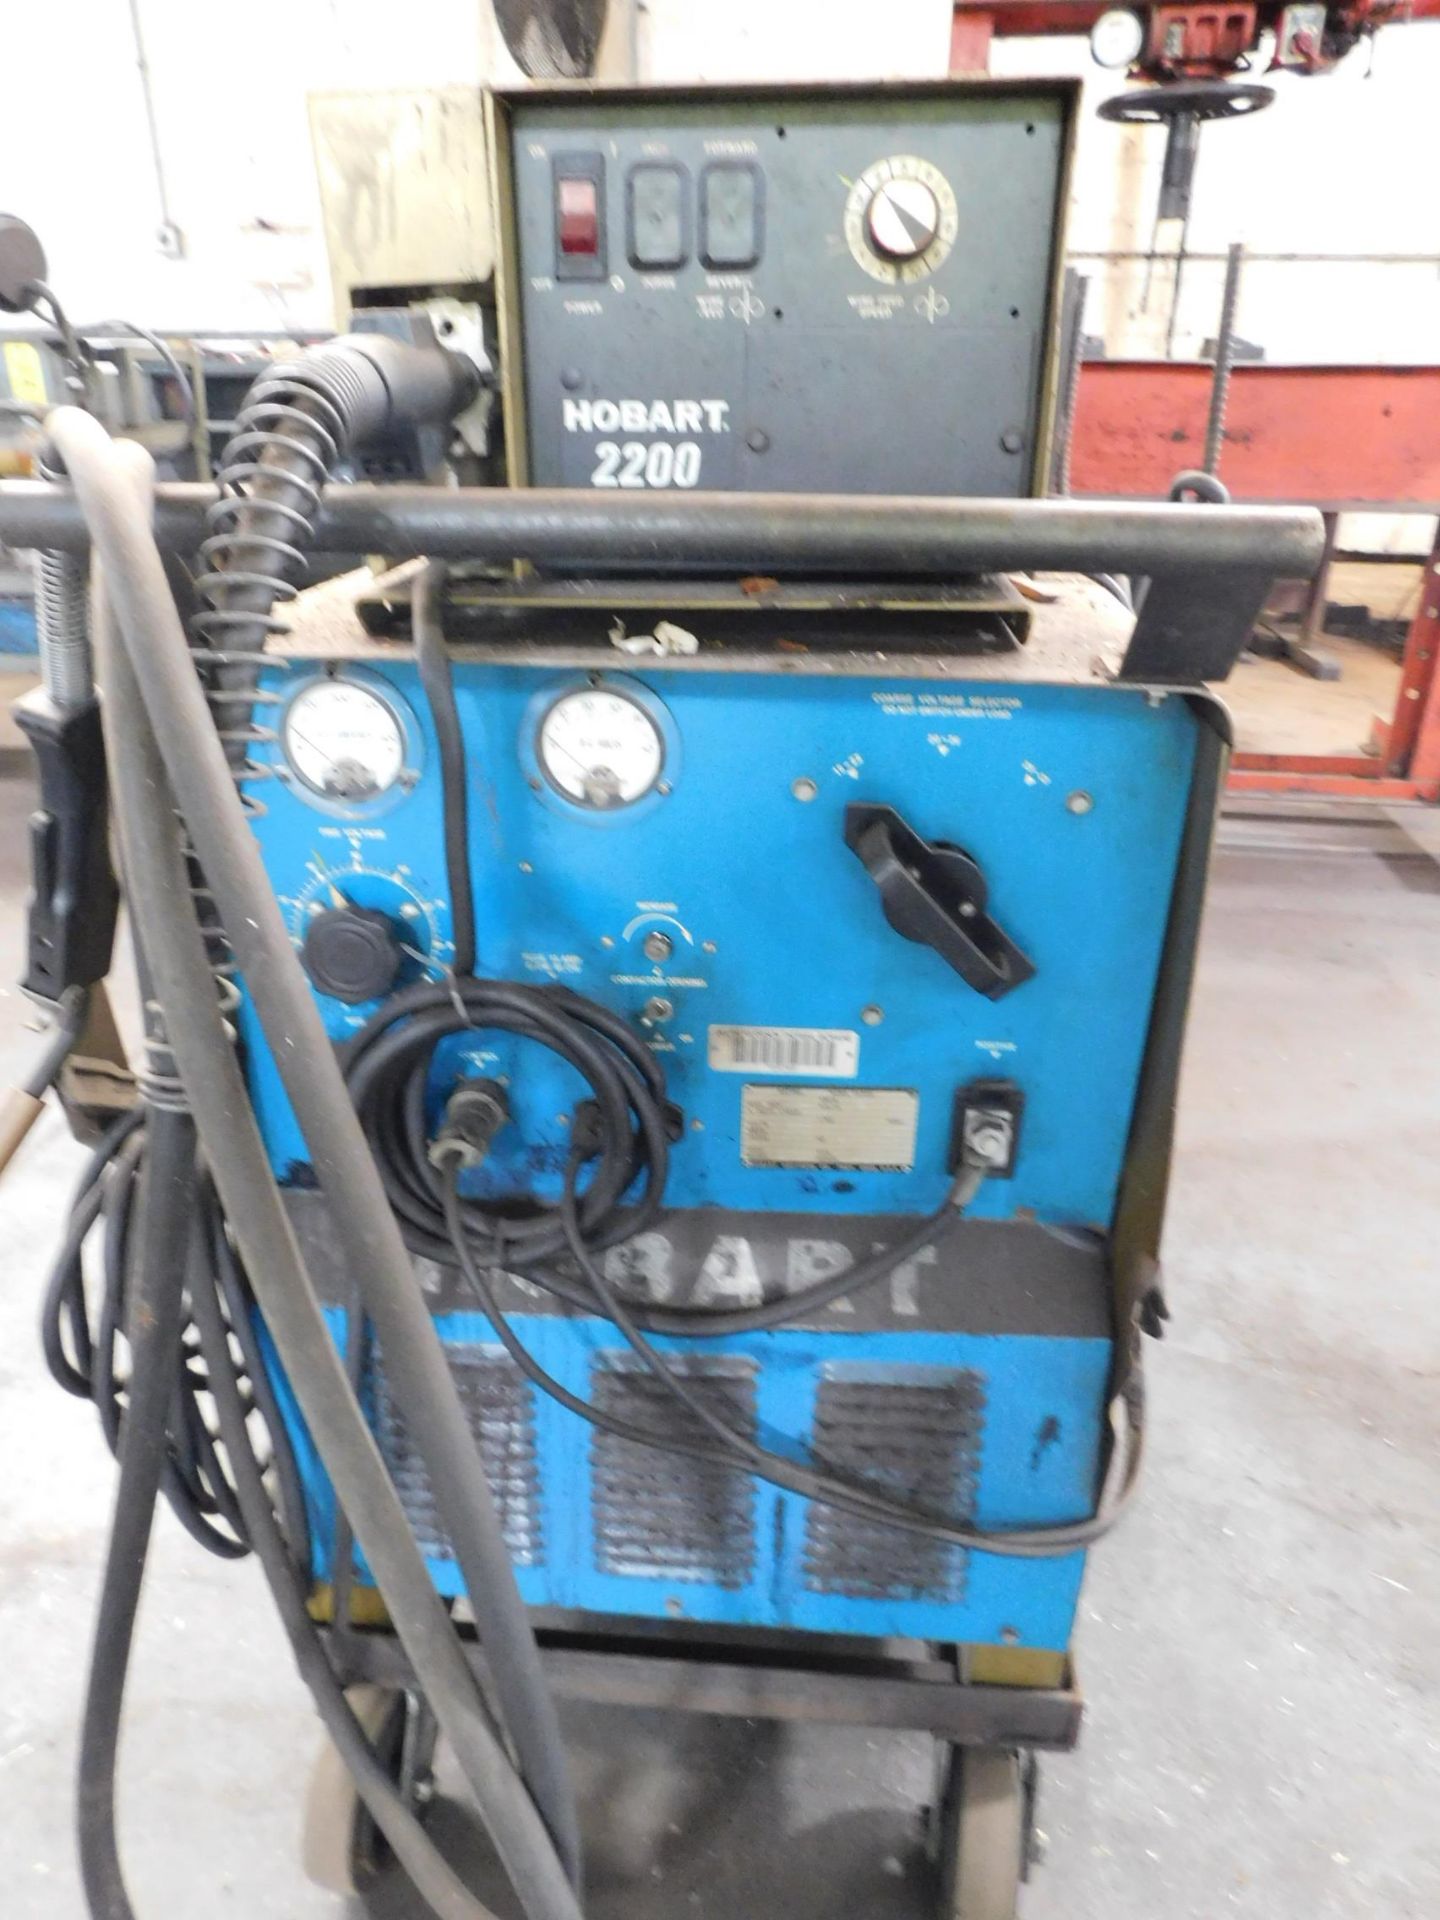 Hobart Model RC-300 Mig Welder, s/n 12RT-69459, with Hobart 2200 Wire Feeder and Mig Gun - Image 2 of 6